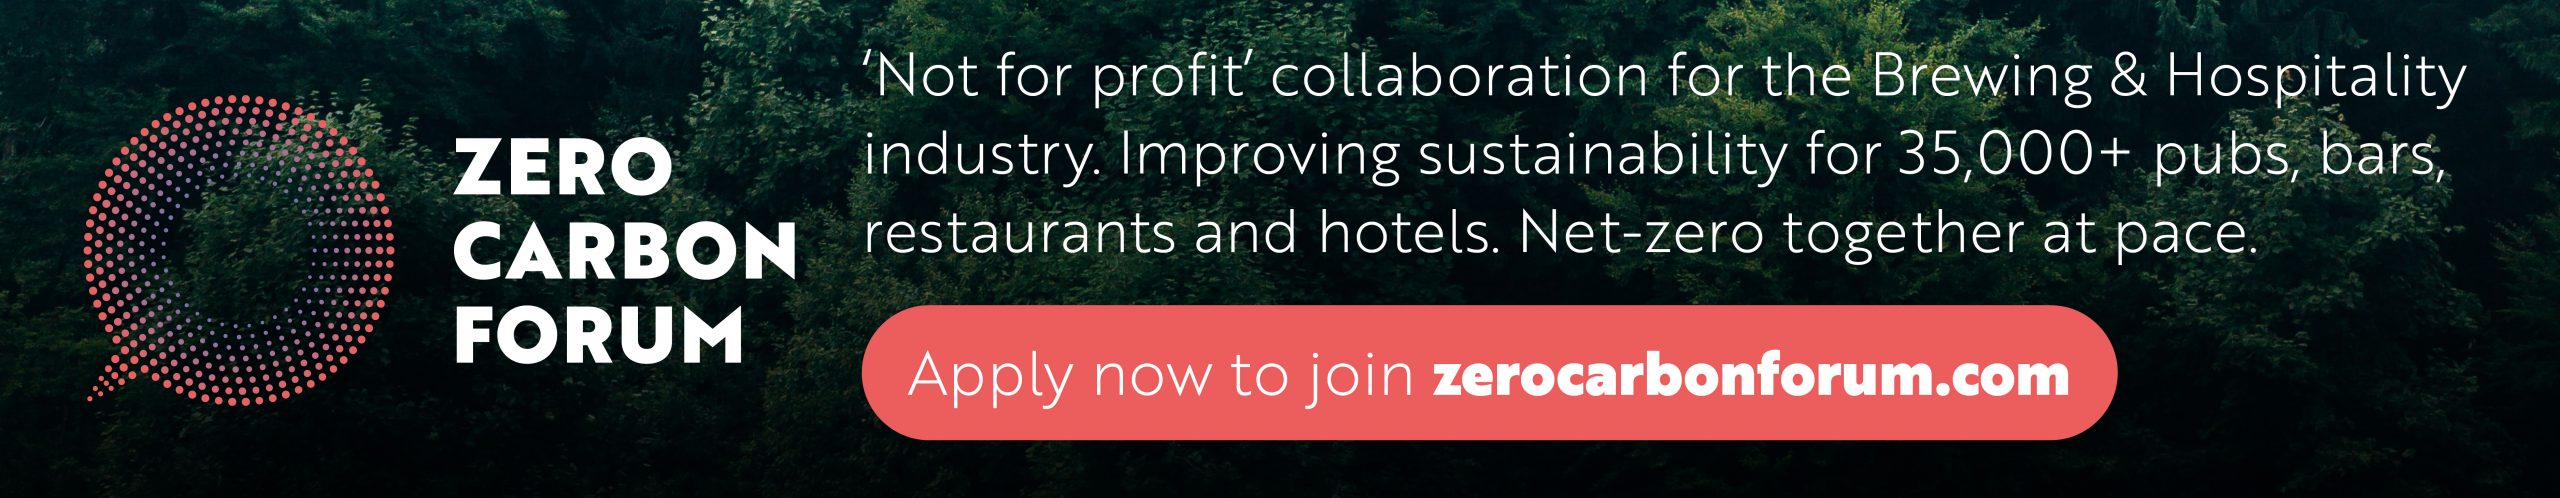 Zero Carbon Forum ~ 'Not for profit' collaboration for the Brewing & Hospitality industry. Improving sustainability for 35,000+ pubs, bars, restaurants and hotels. Net-zero together at pace.